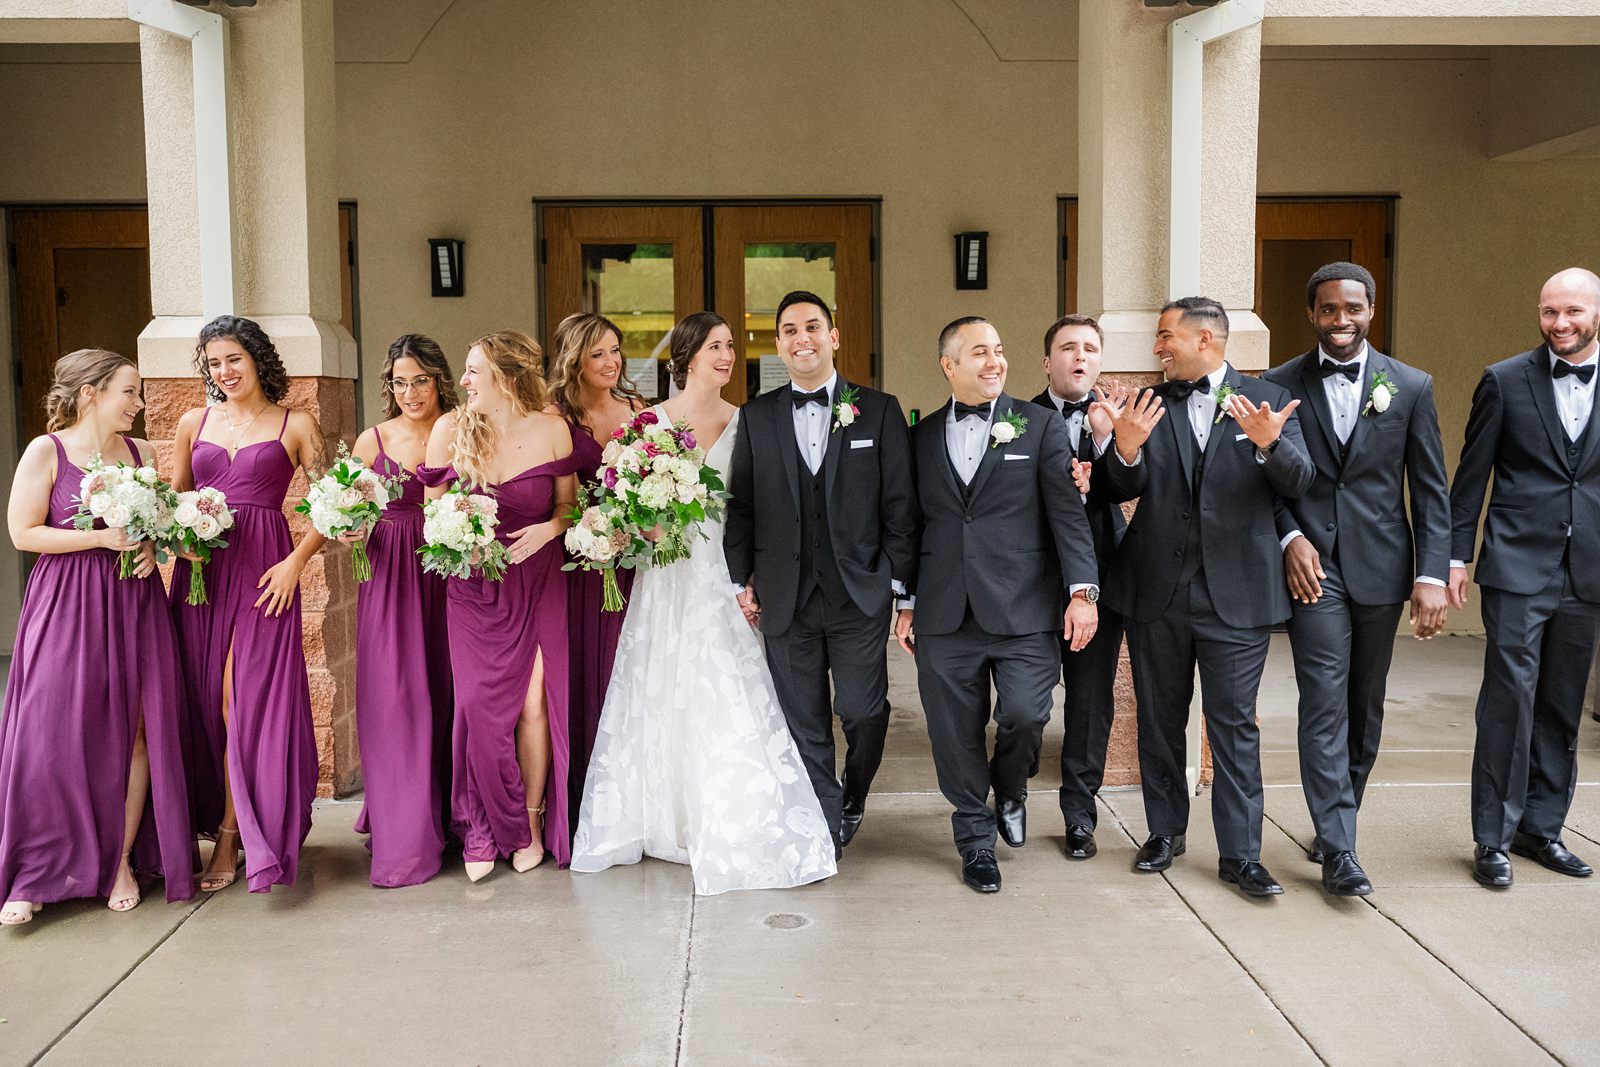 Wedding Party Portraits at Fall Hermitage Country Club Wedding 